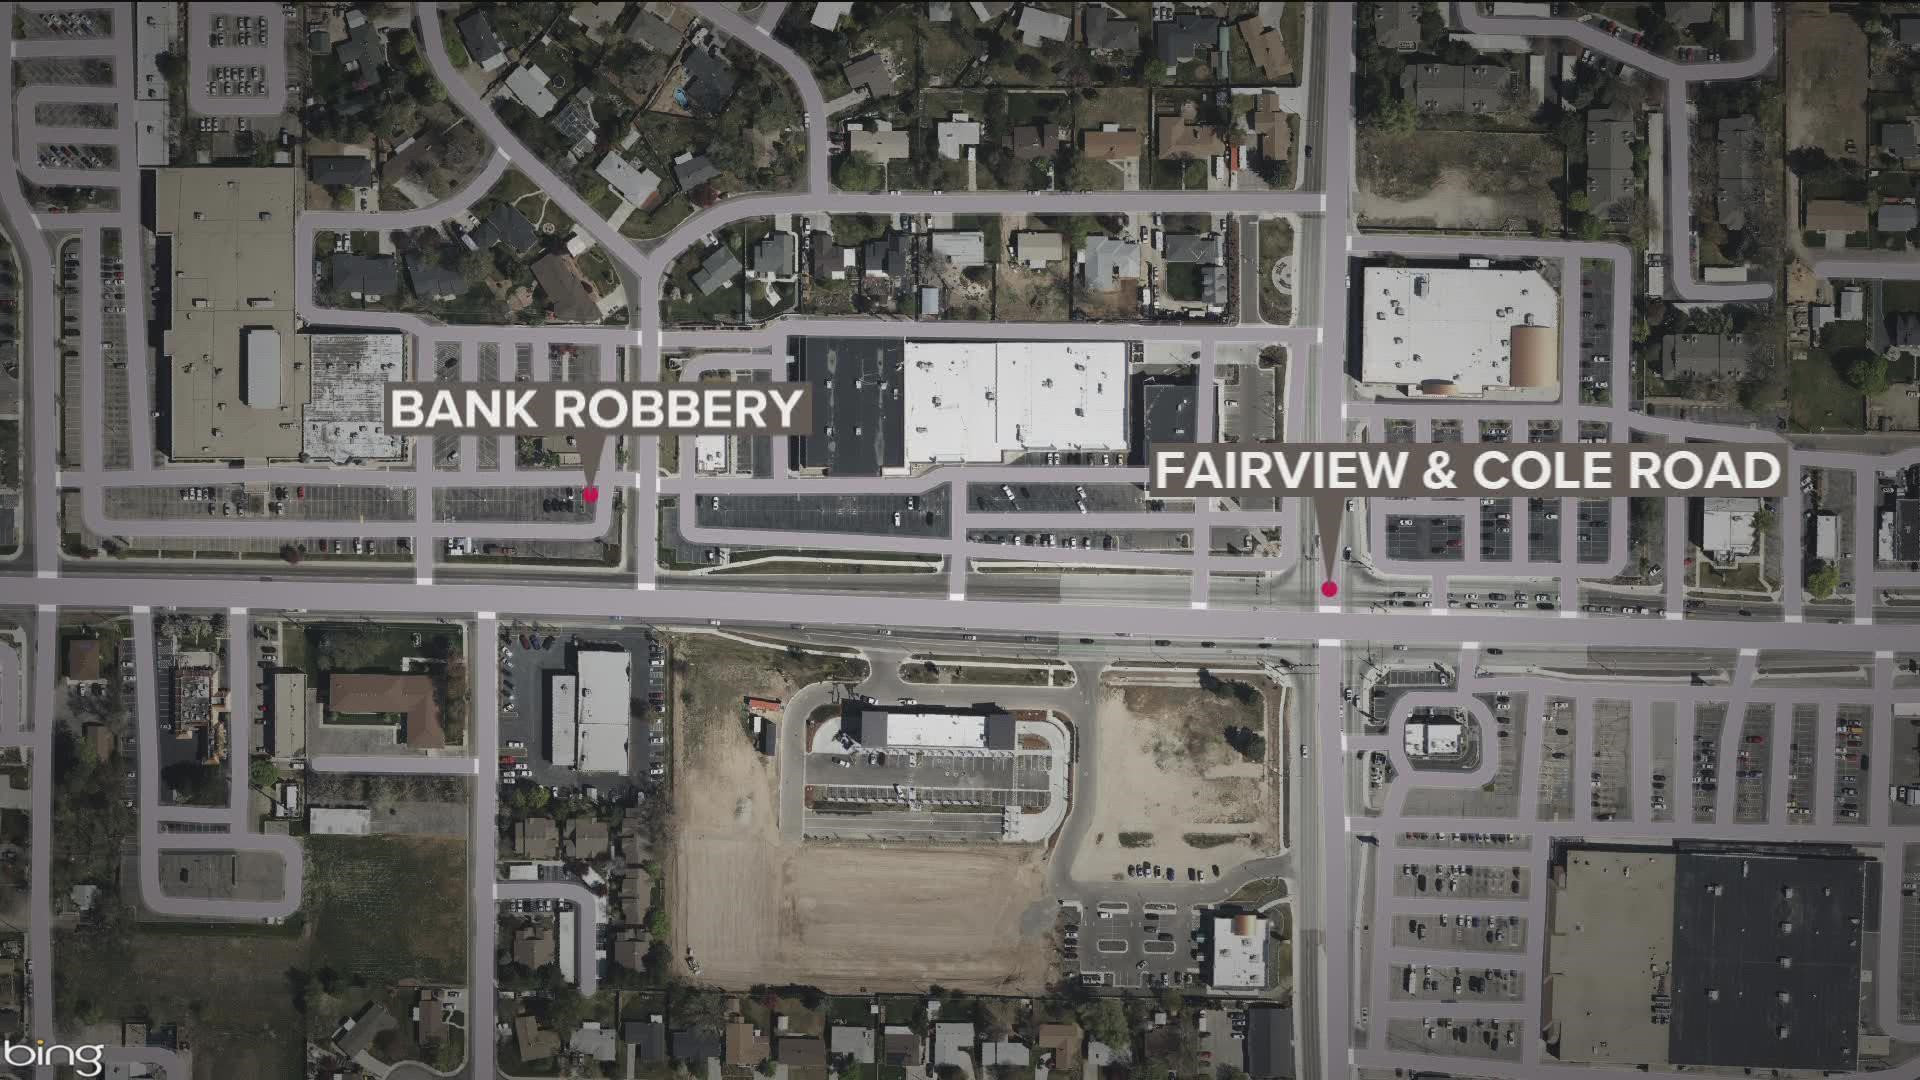 The robbery occurred Monday afternoon at a bank along Fairview near Cole Road.